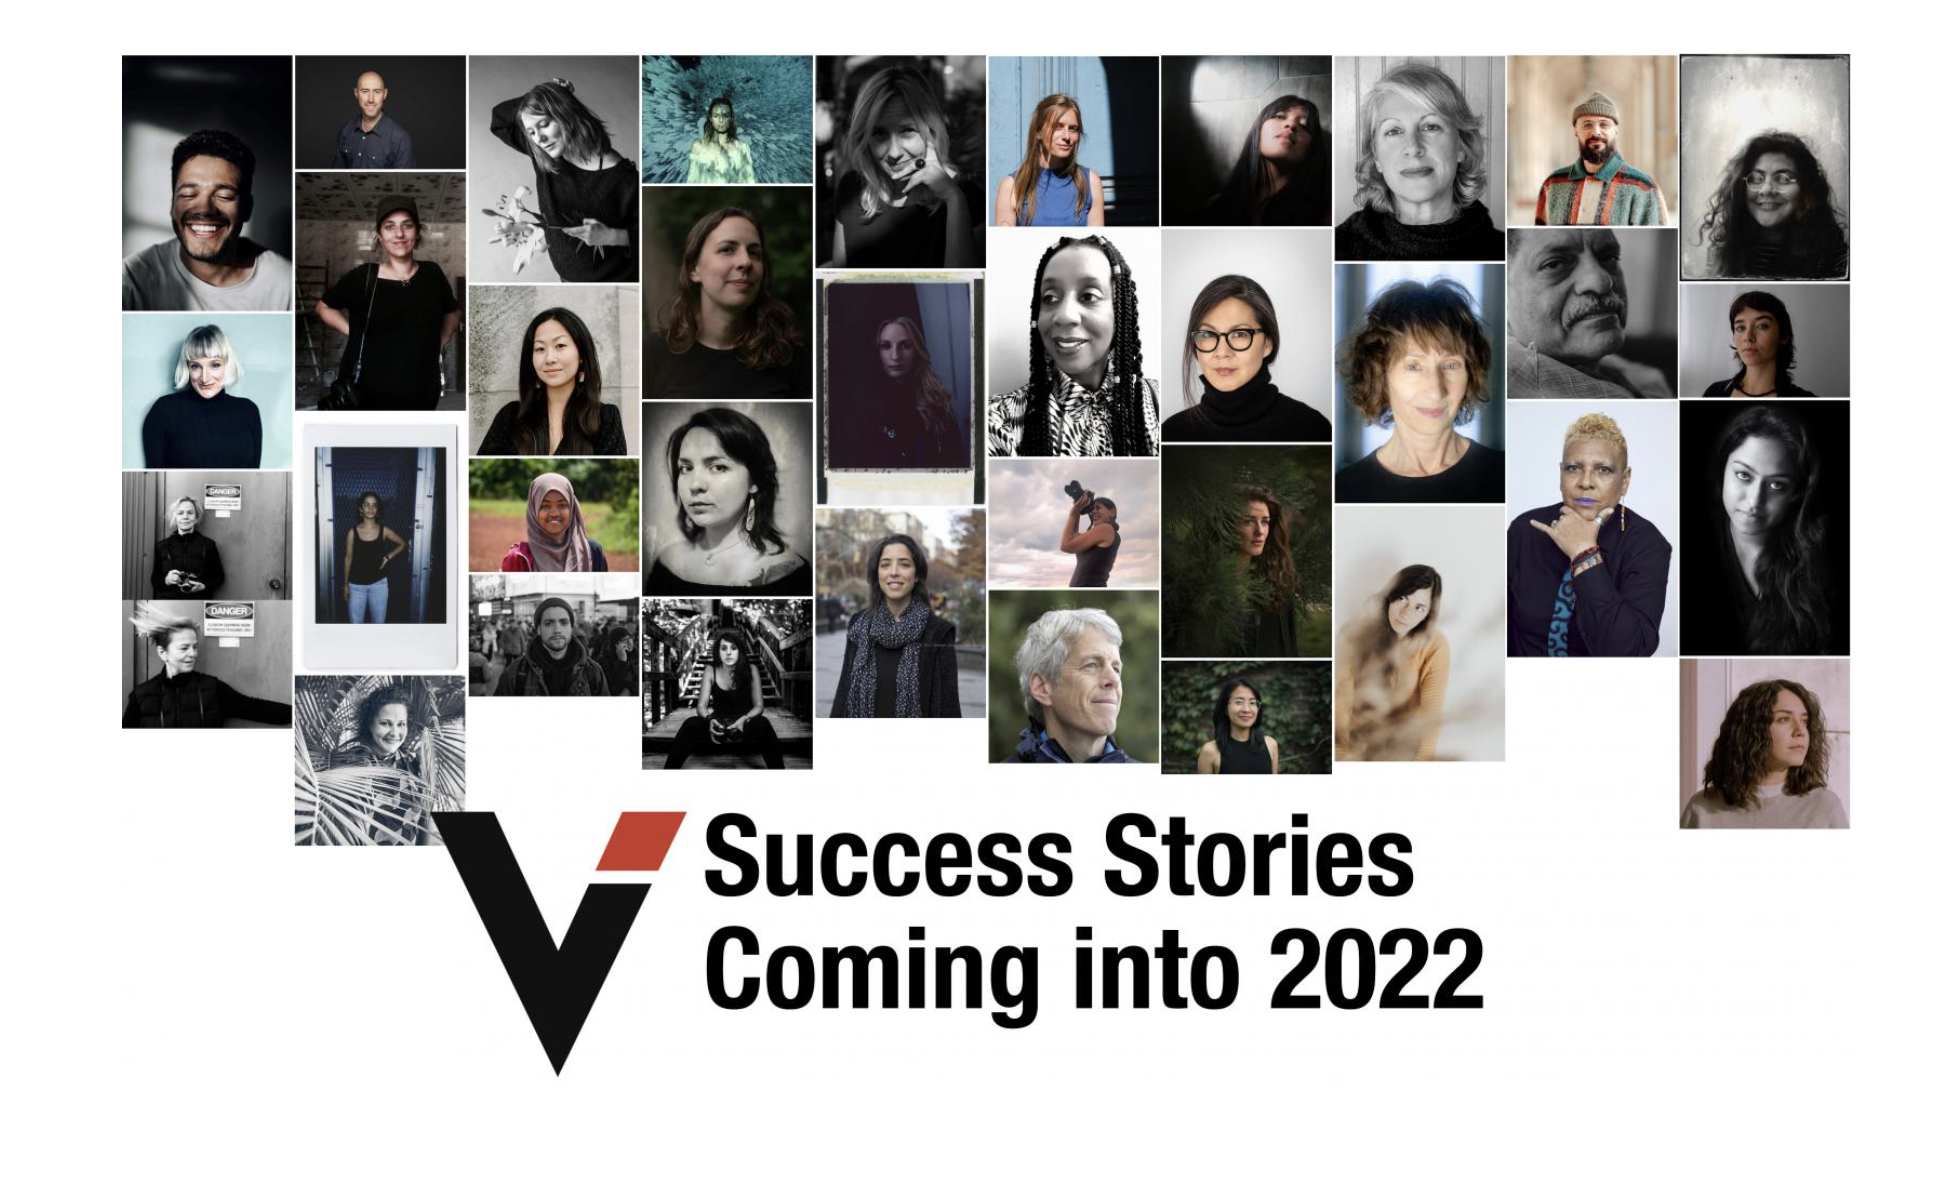 Visura is delighted to welcome ...compelling visual storytelling.